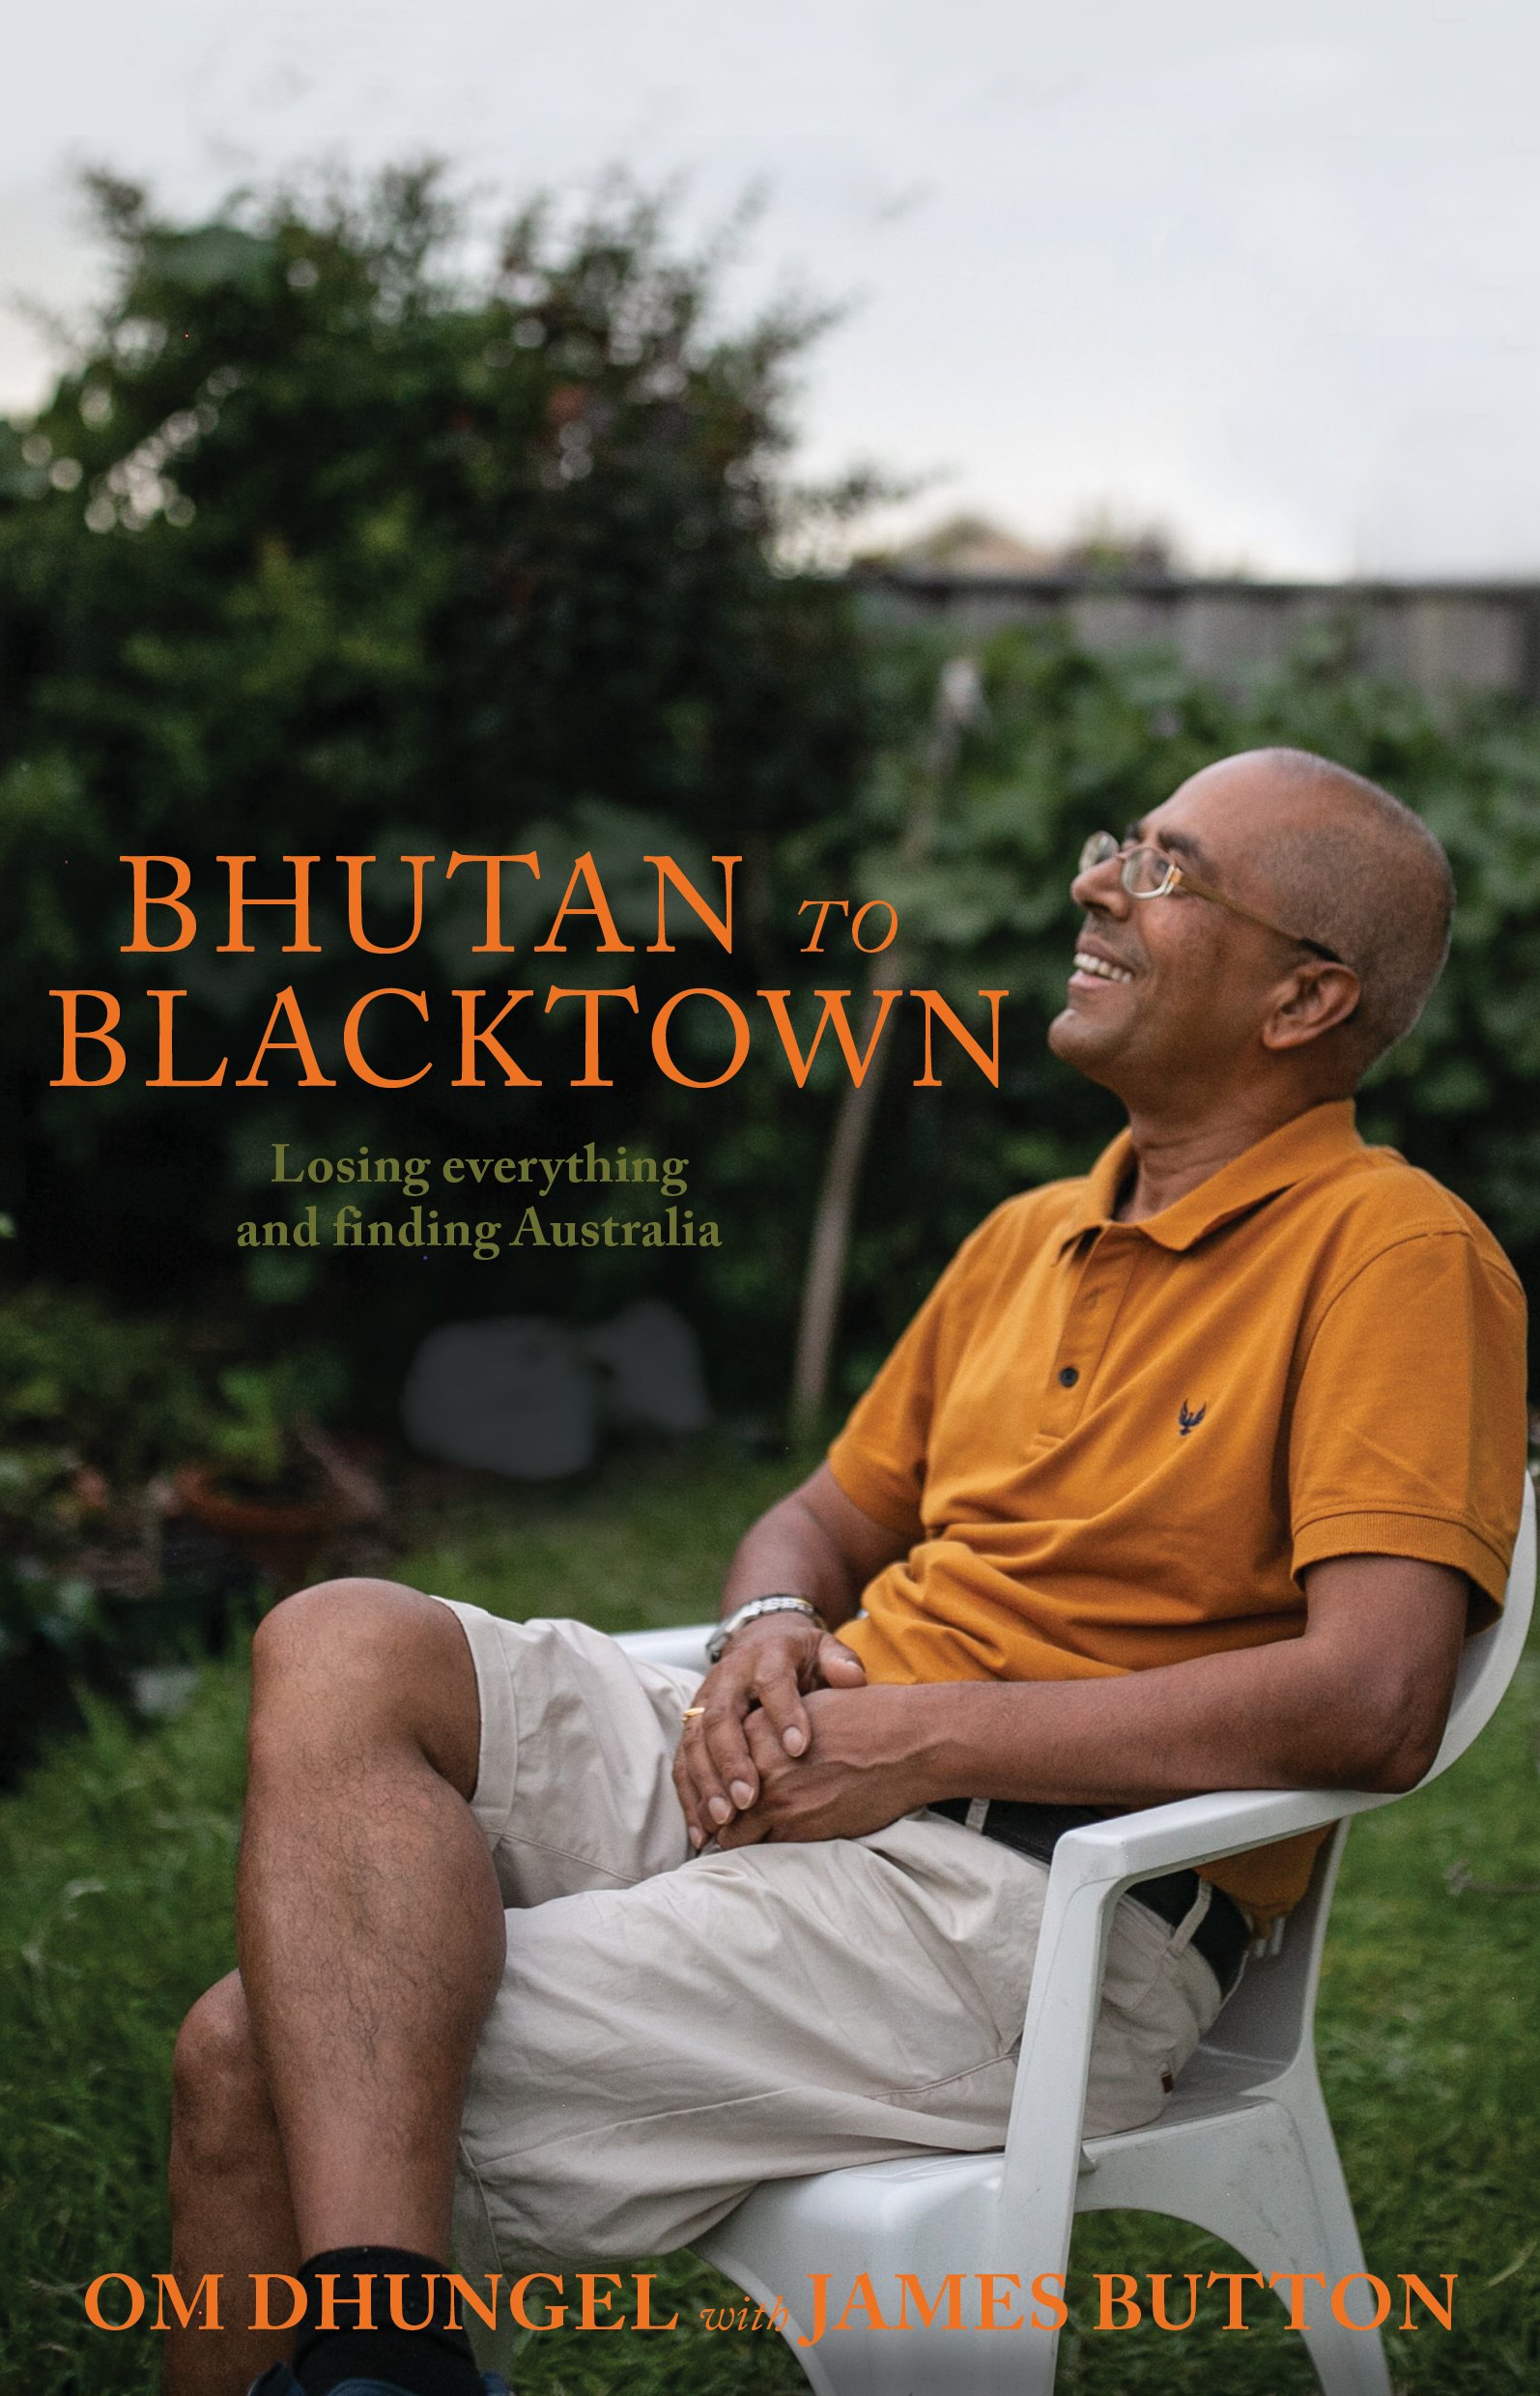 Bhutan To Blacktown by Om Dhungel with James Button